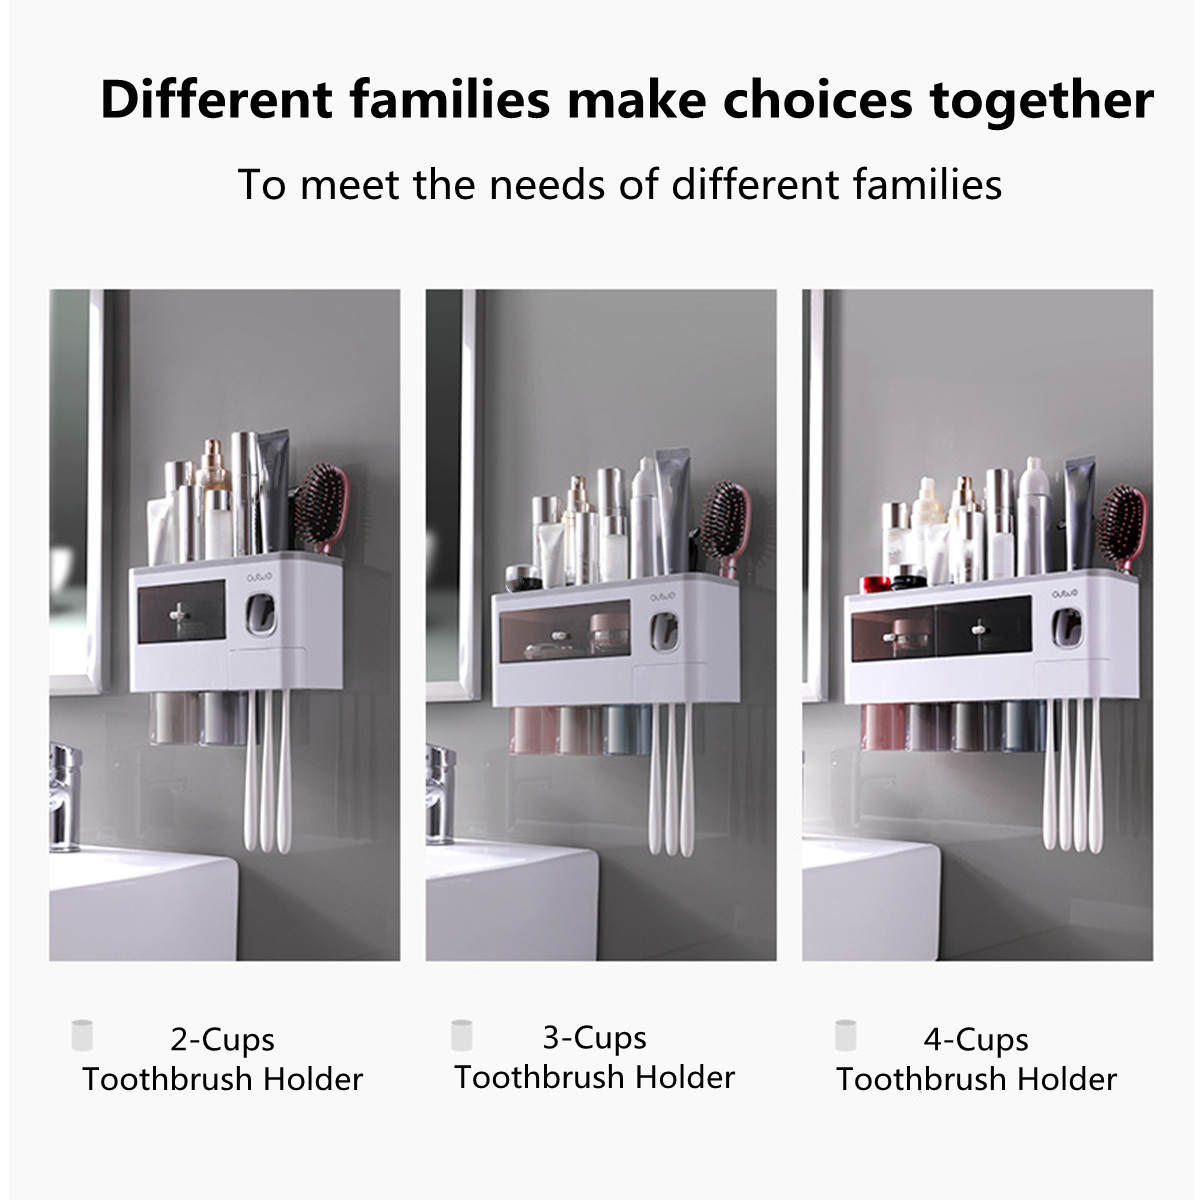 234-Cups-Multi-function-Toothbrush-Holder-Waterproof-Anti-dust-Mouth-Cup-Rack-Wall-mounted-Toothbrus-1924780-7